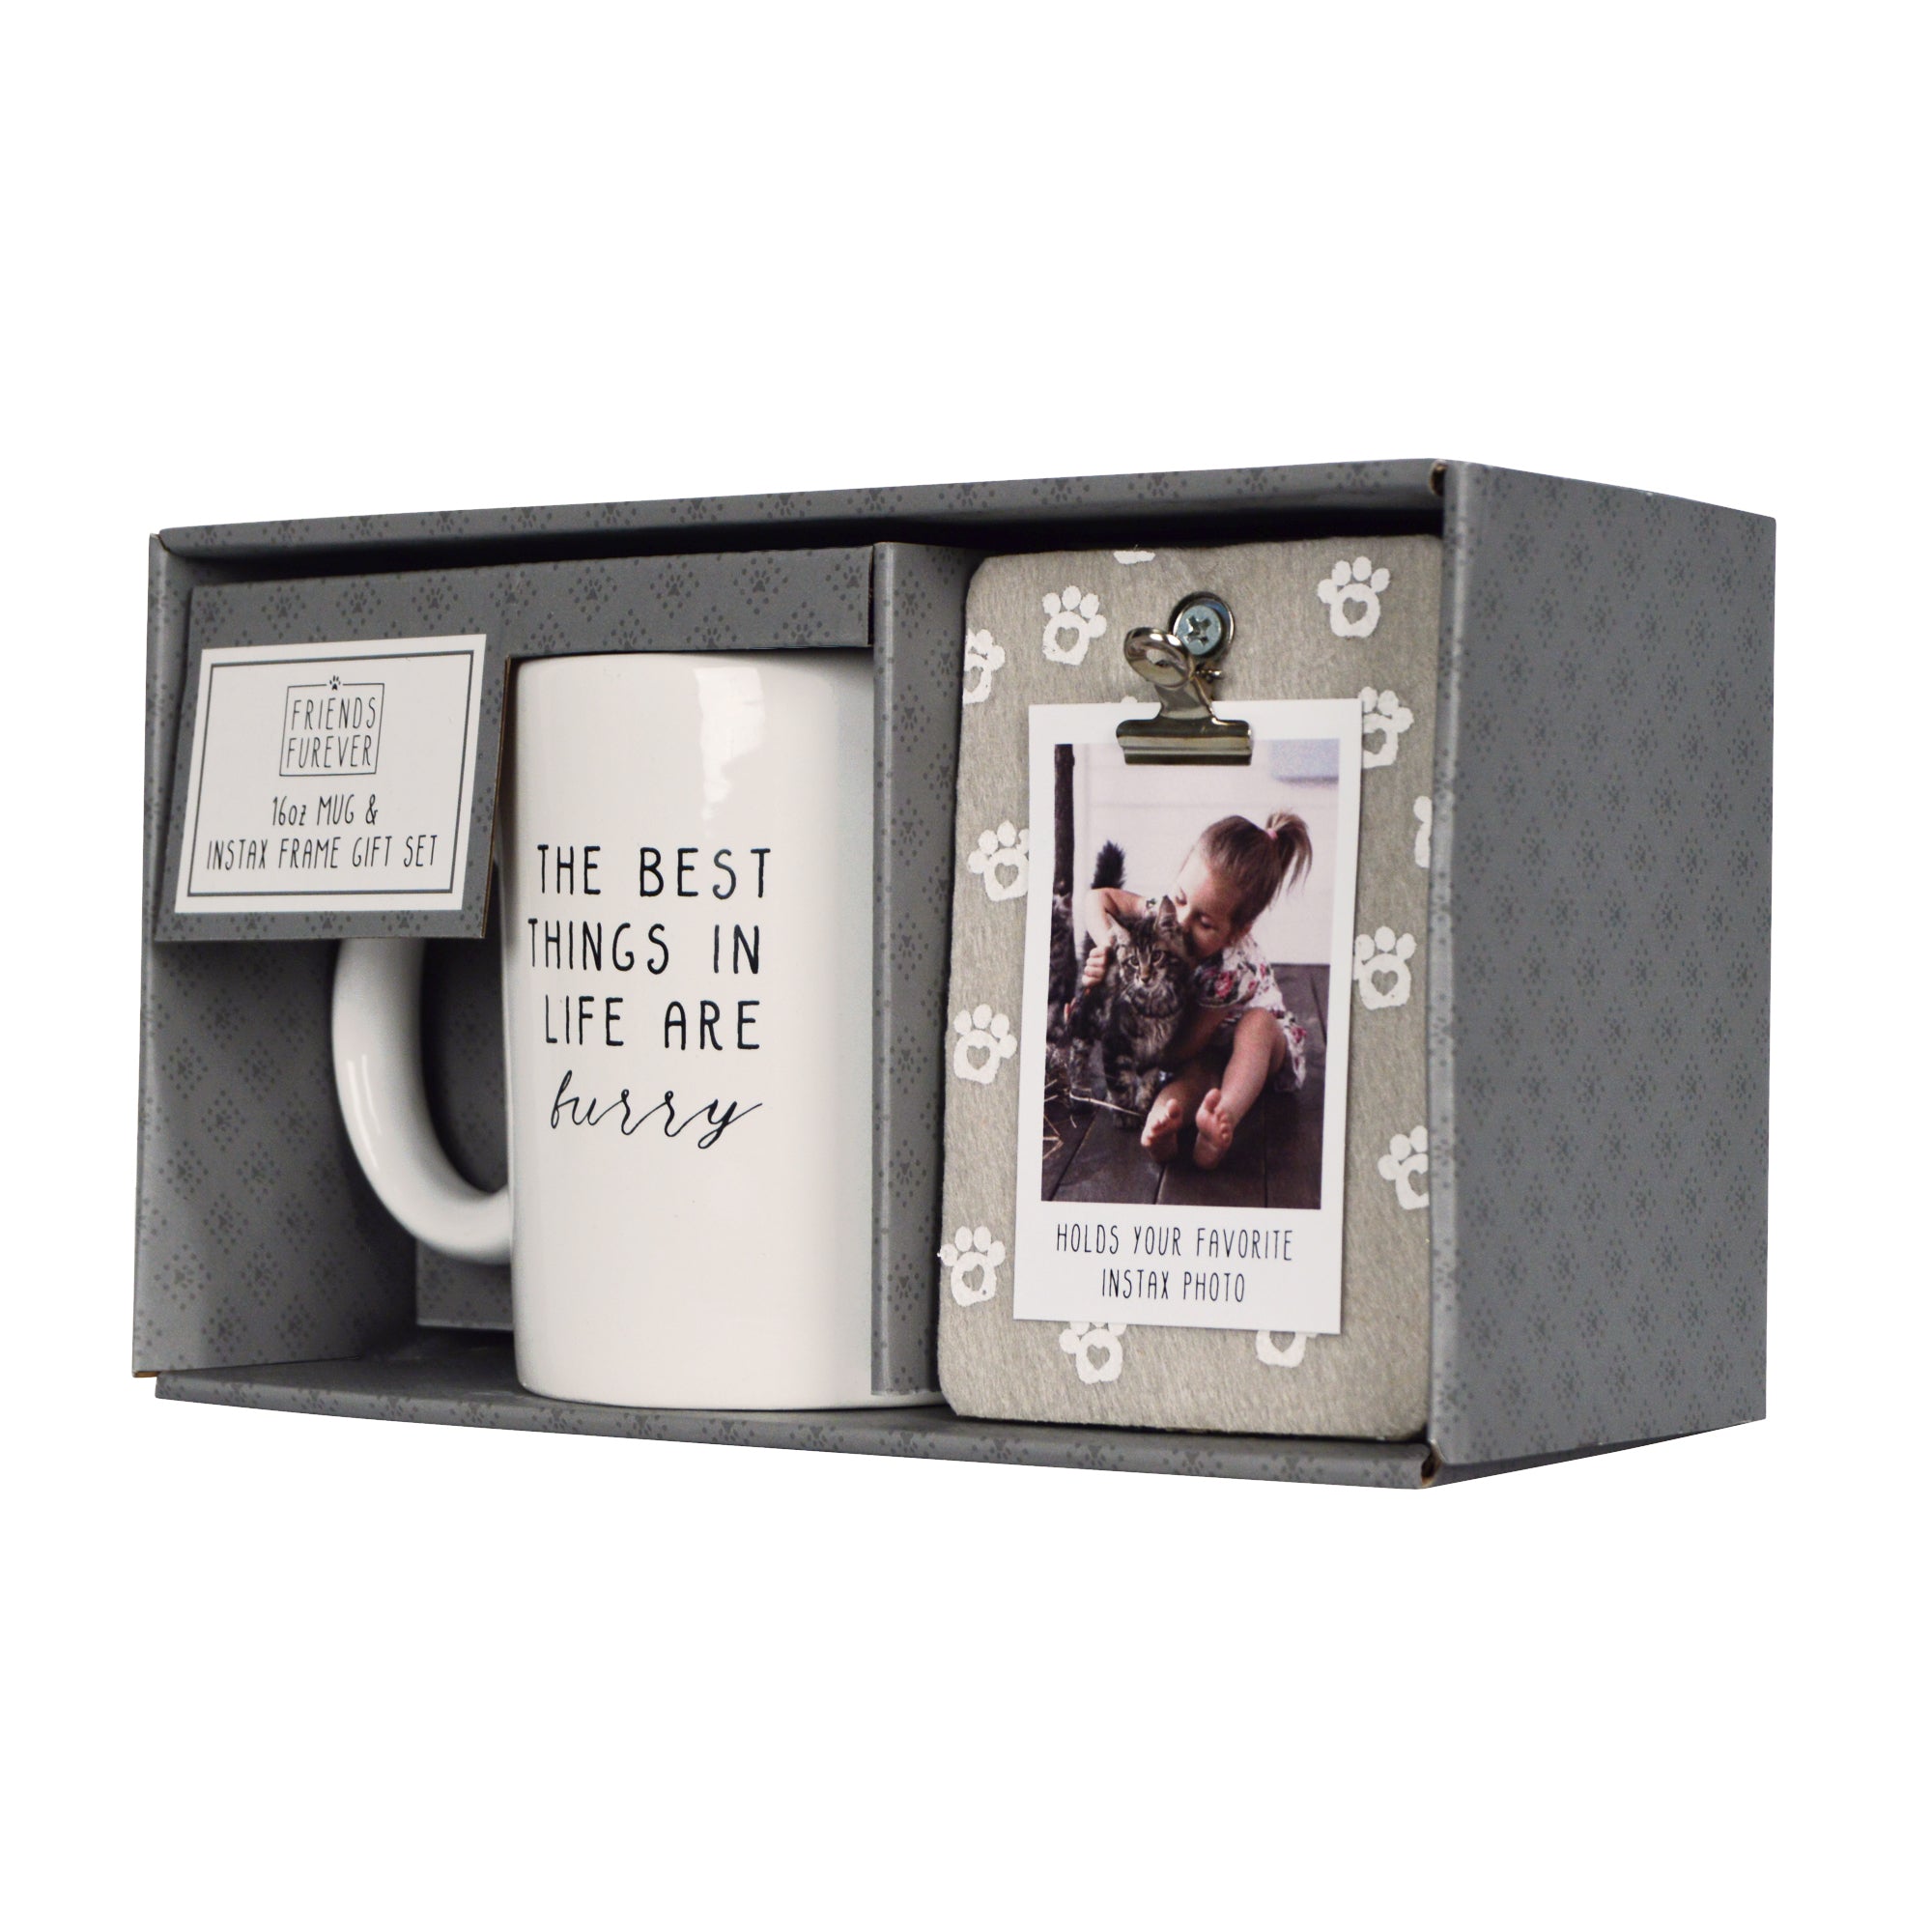 The Best Things in Life are Furry Clip Photo Frame & Coffee Mug Gift Set